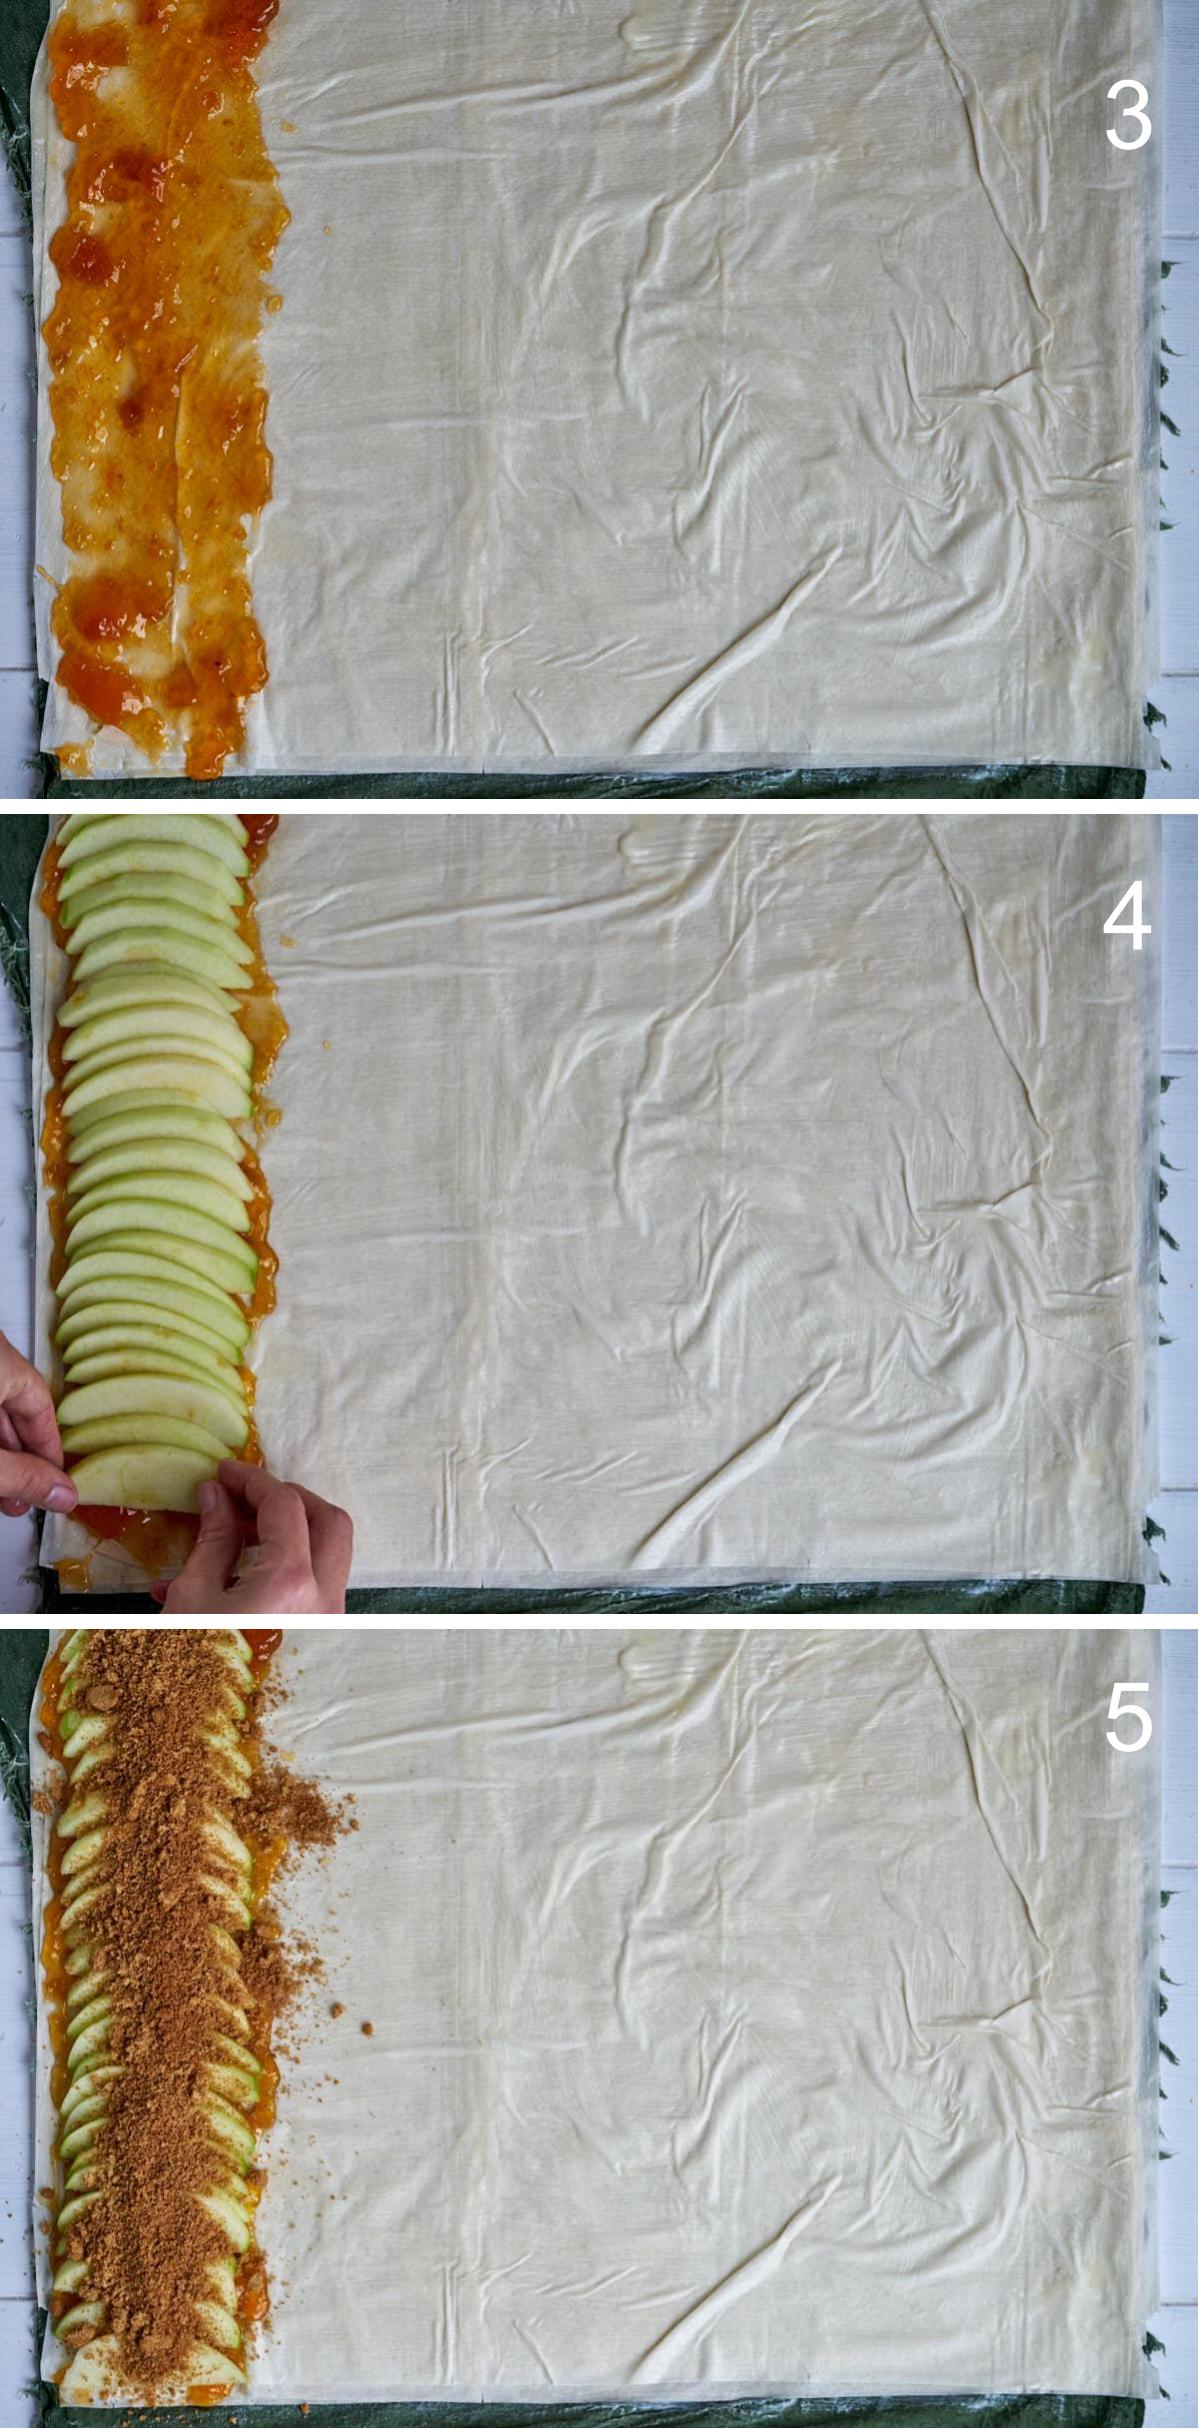 Layering jam apples and cinnamon on pastry dough.